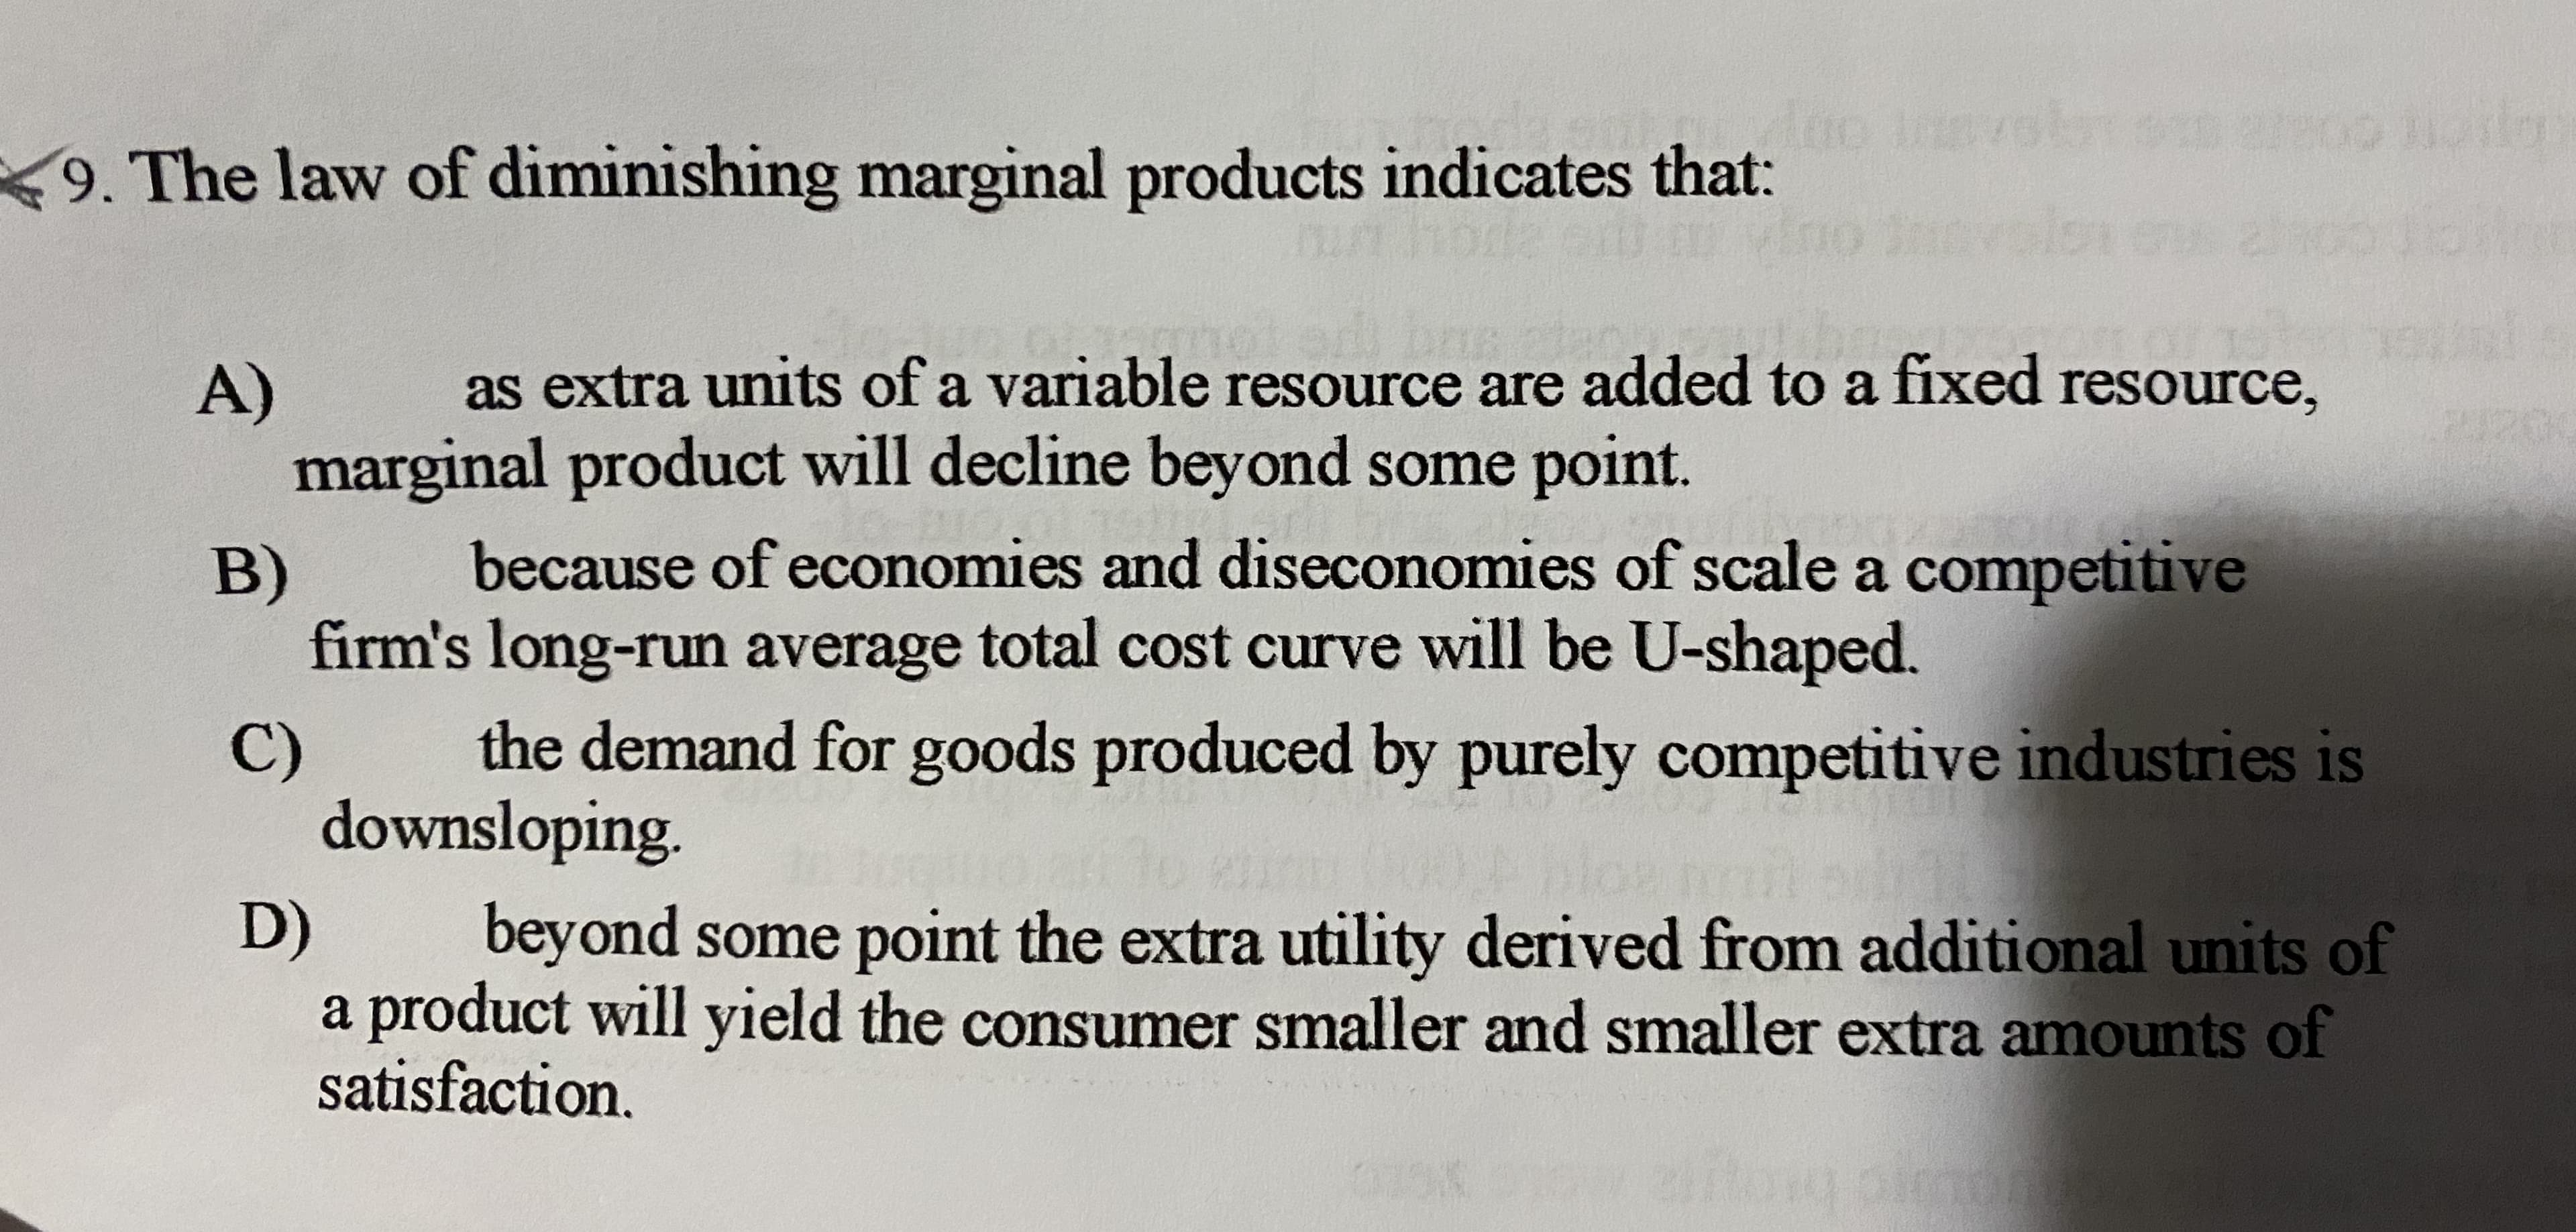 9. The law of diminishing marginal products indicates that:
as extra units of a variable resource are added to a fixed resource,
A)
marginal product will decline beyond some point.
because of economies and diseconomies of scale a competitive
B)
firm's long-run average total cost curve will be U-shaped.
the demand for goods produced by purely competitive industries is
C)
downsloping.
D)
beyond some point the extra utility derived from additional units of
a product will yield the consumer smaller and smaller extra amounts of
satisfaction.
